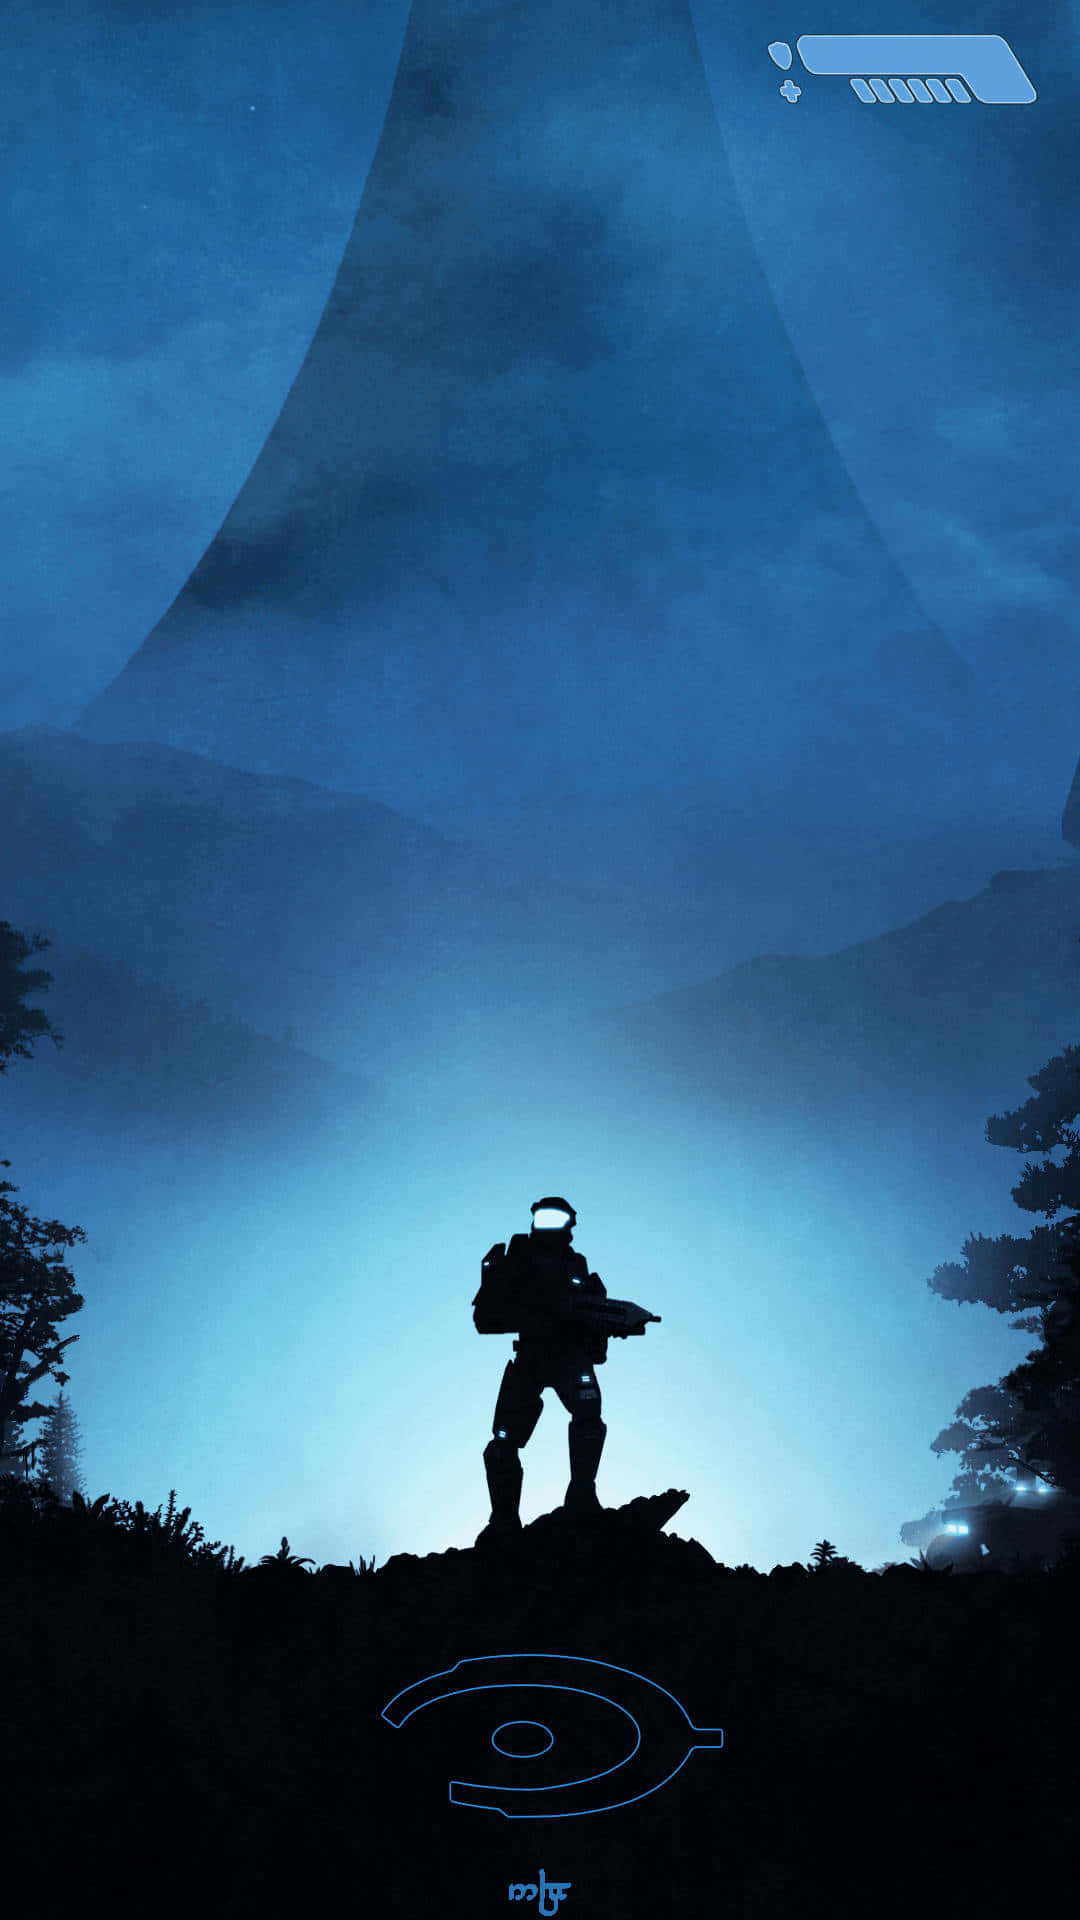 Halo iphone wallpaper by GhostMaster007 on DeviantArt